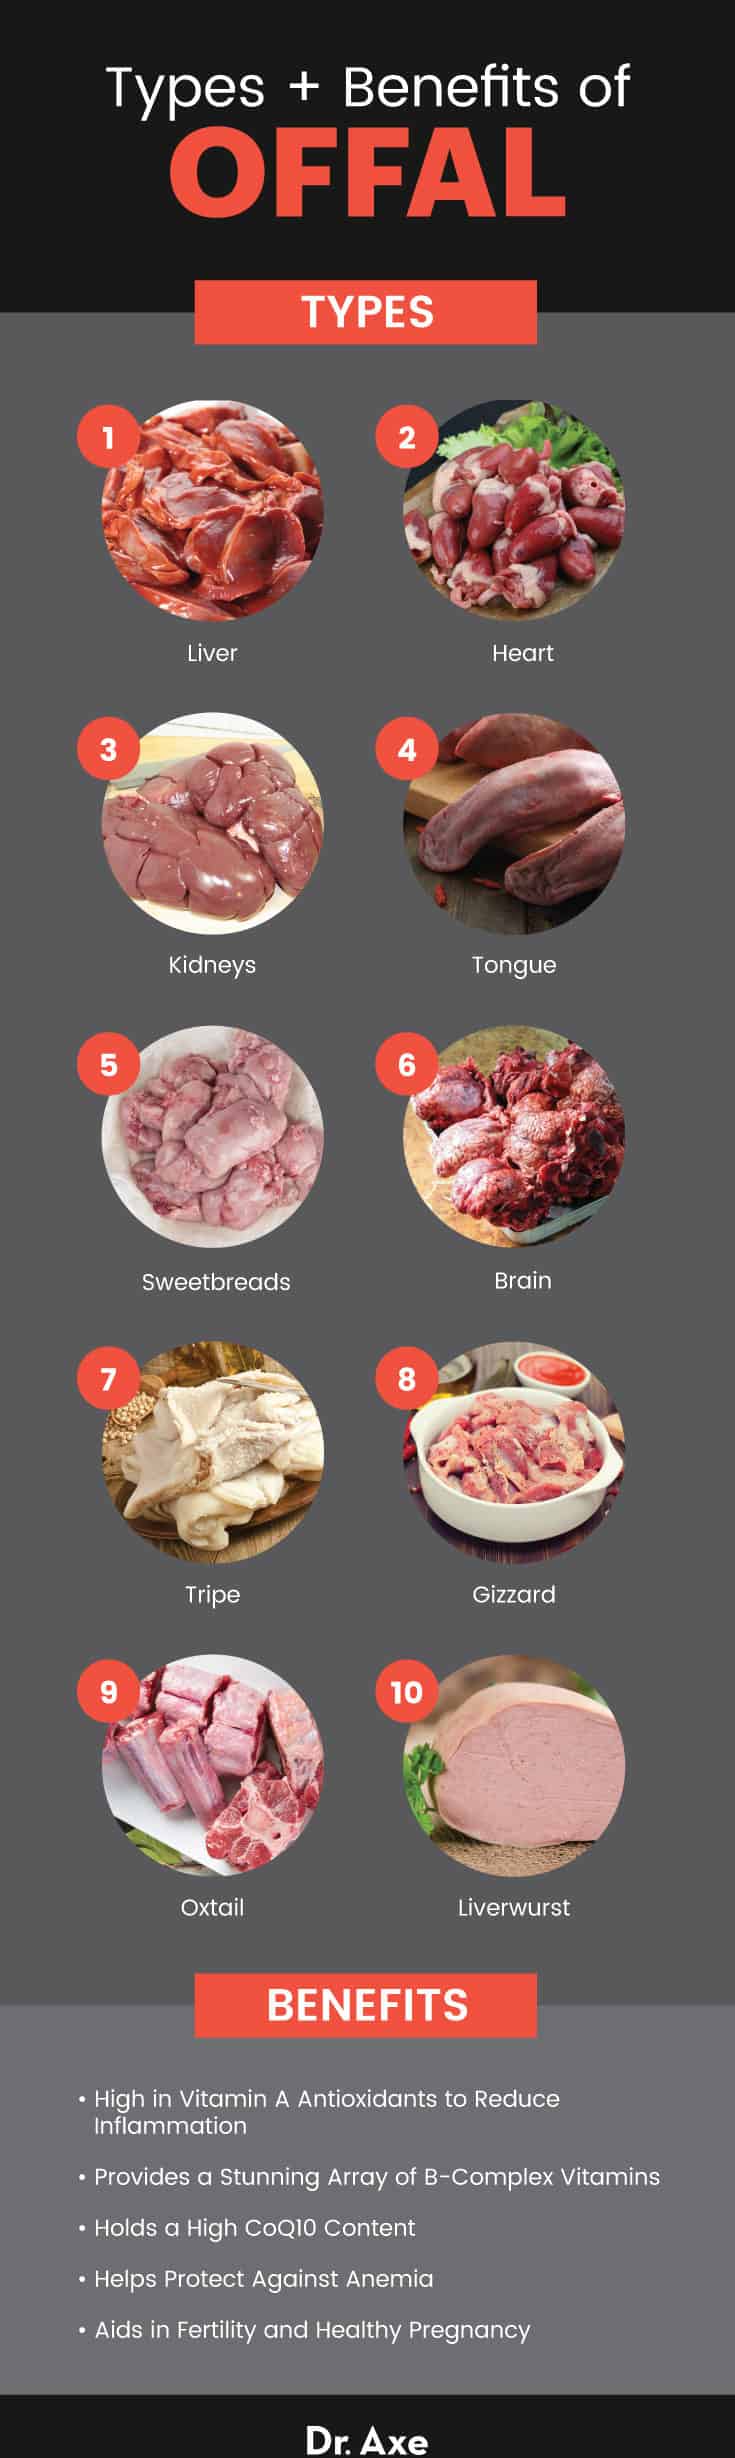 Offal types and benefits - Dr. Axe